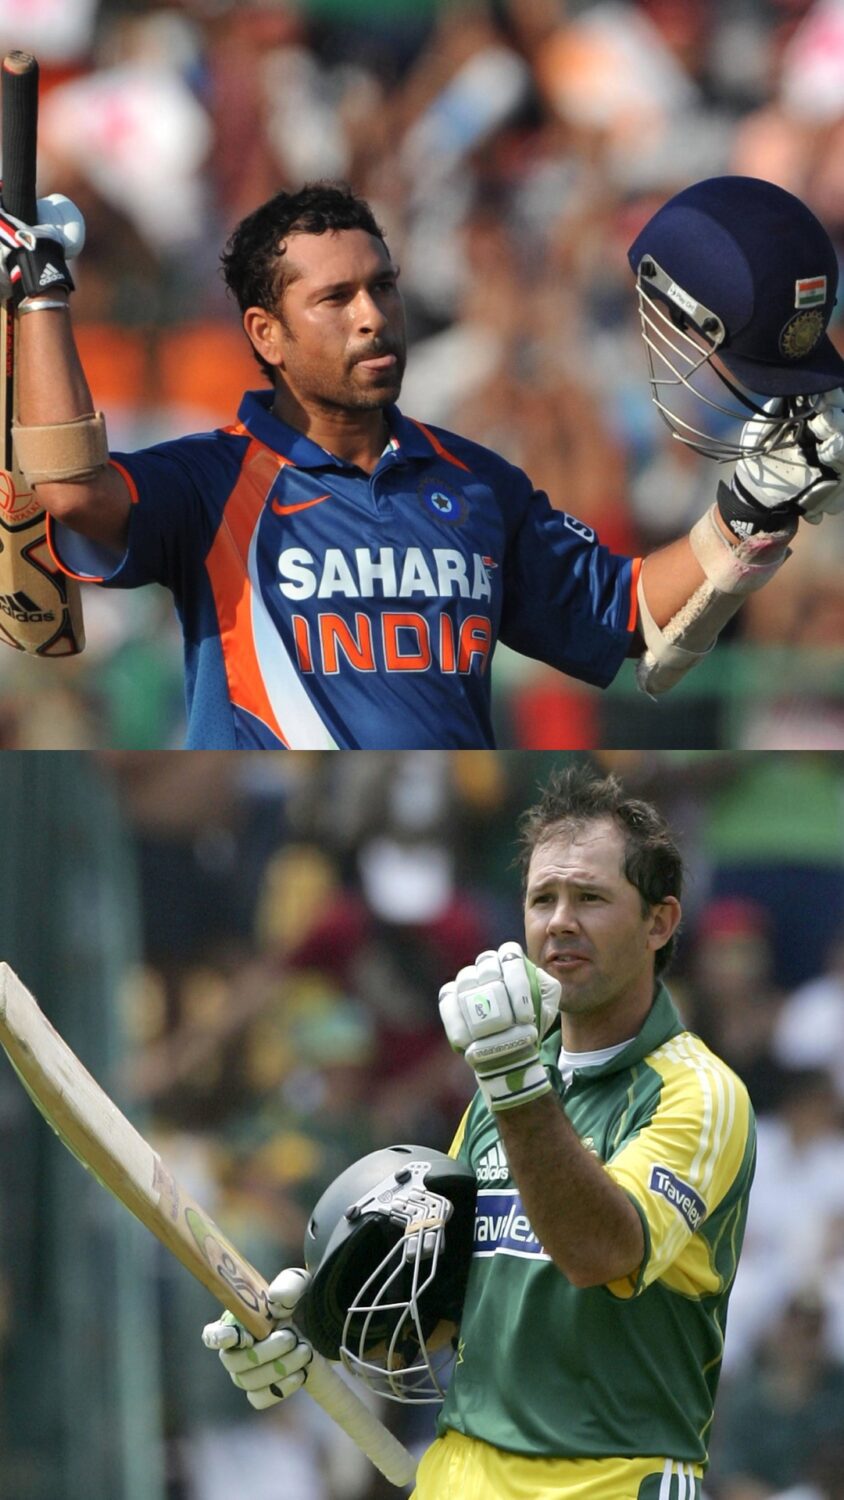 Top 10 Batters To Score Most Runs In Odi World Cup History Featuring Sachin Tendulkar And Ricky Ponting